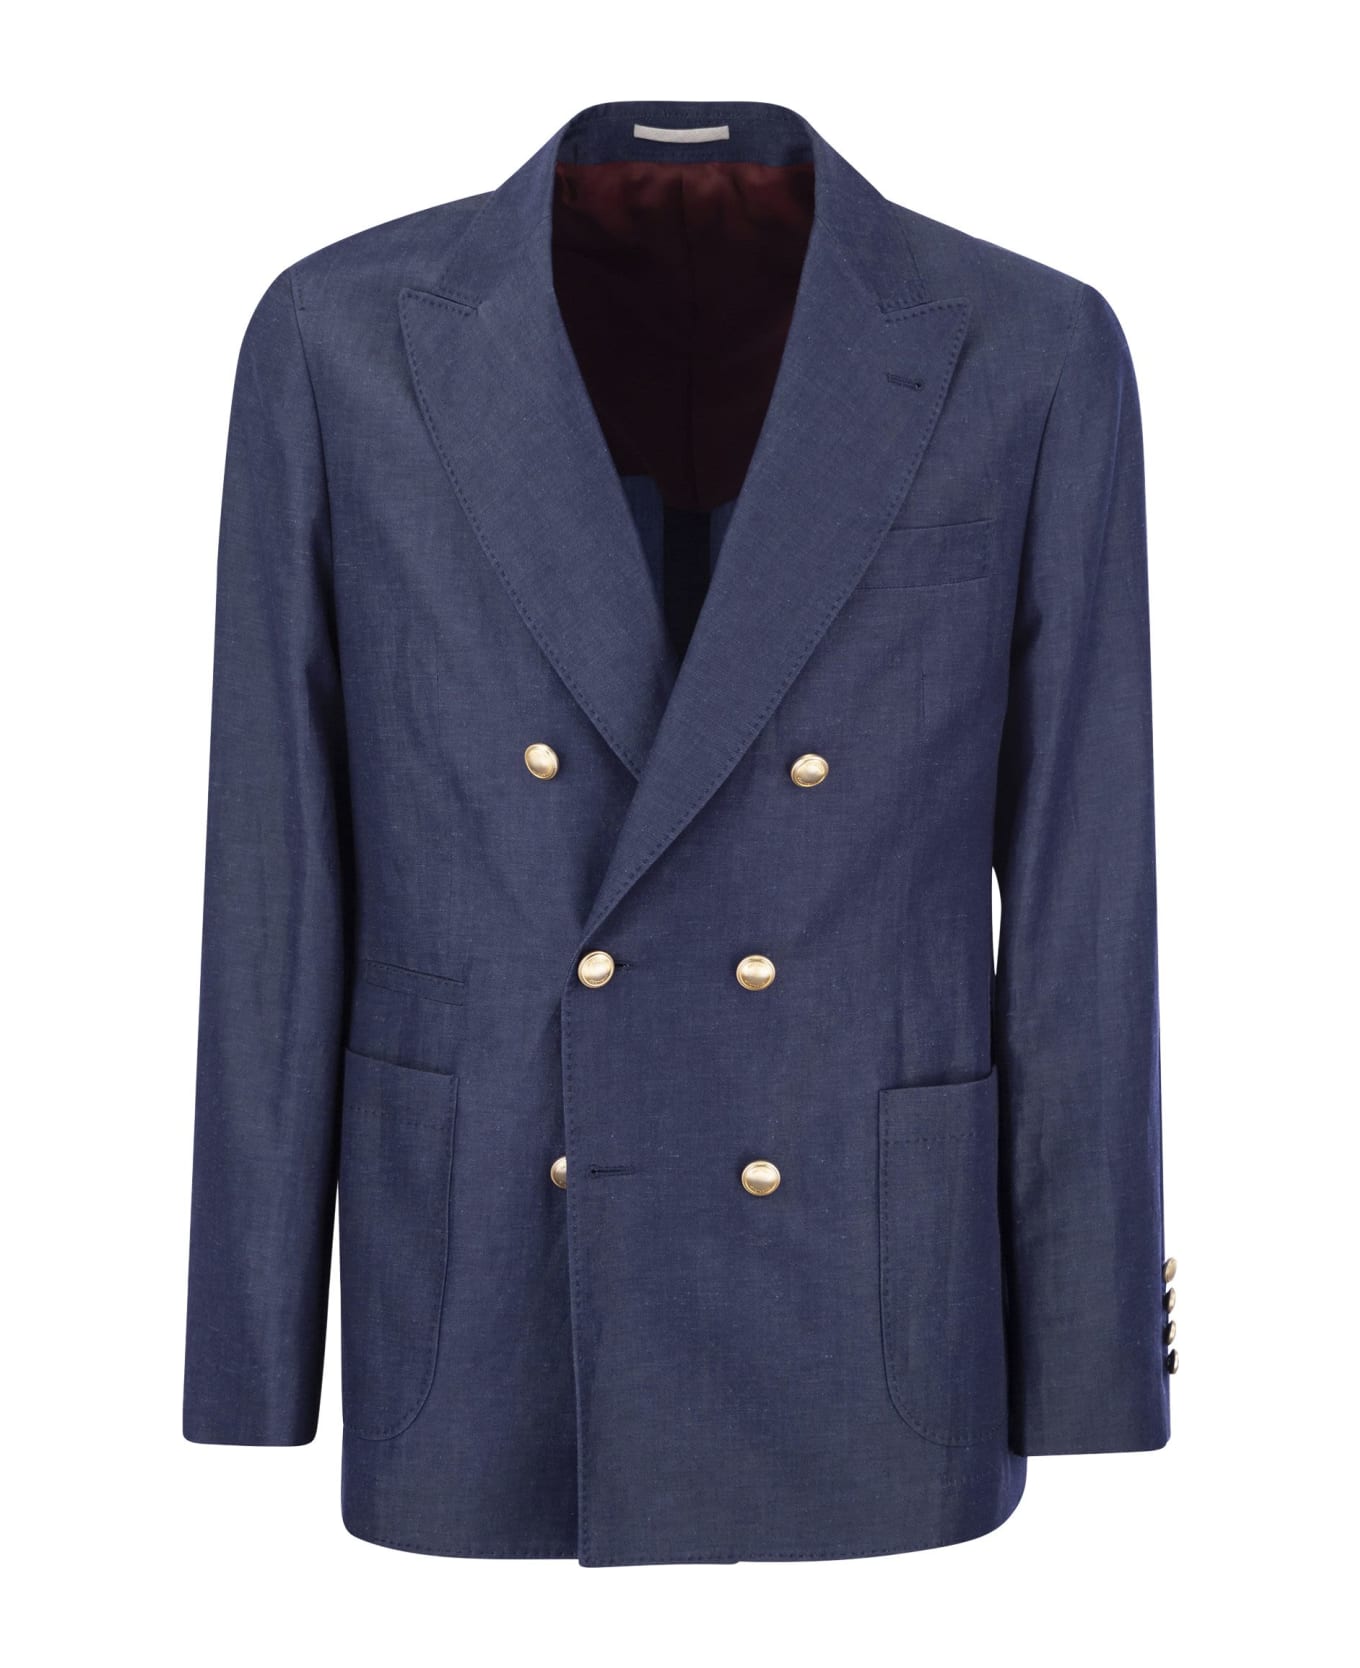 Brunello Cucinelli Double-breasted Jacket - Blue スーツ